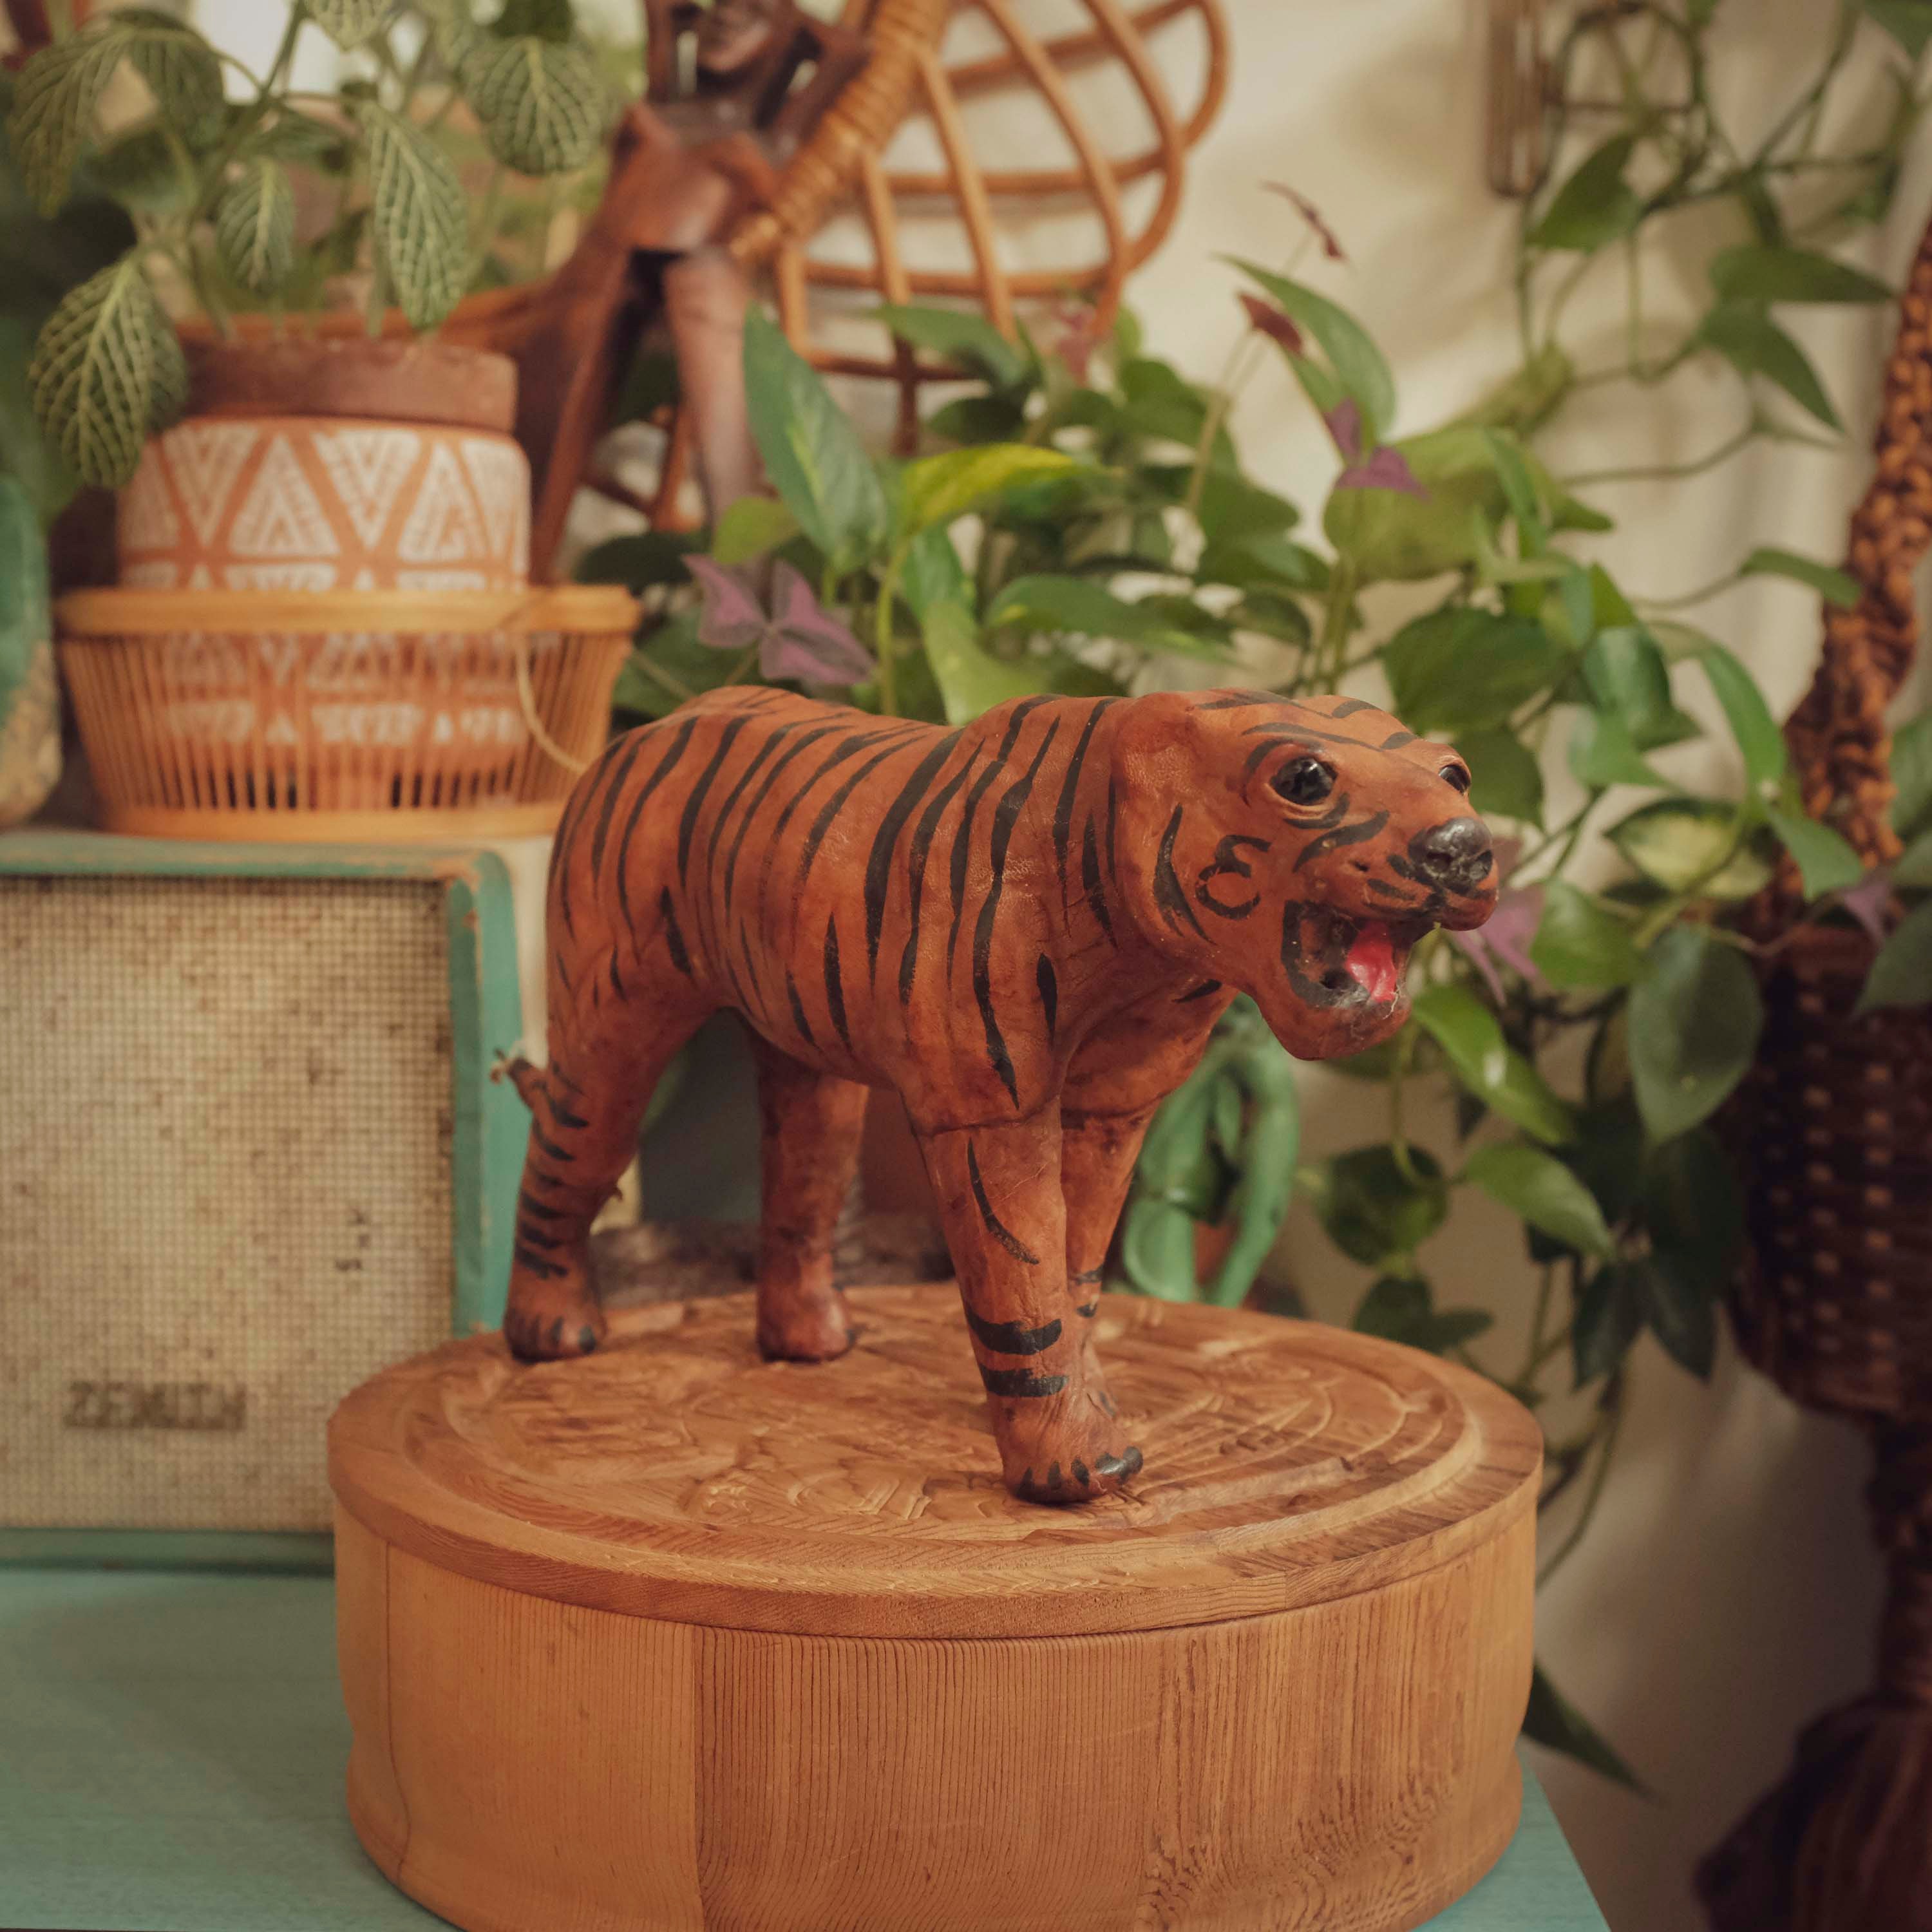 Vintage Large Leather Wrapped Whimsical Tiger Decorative Statue